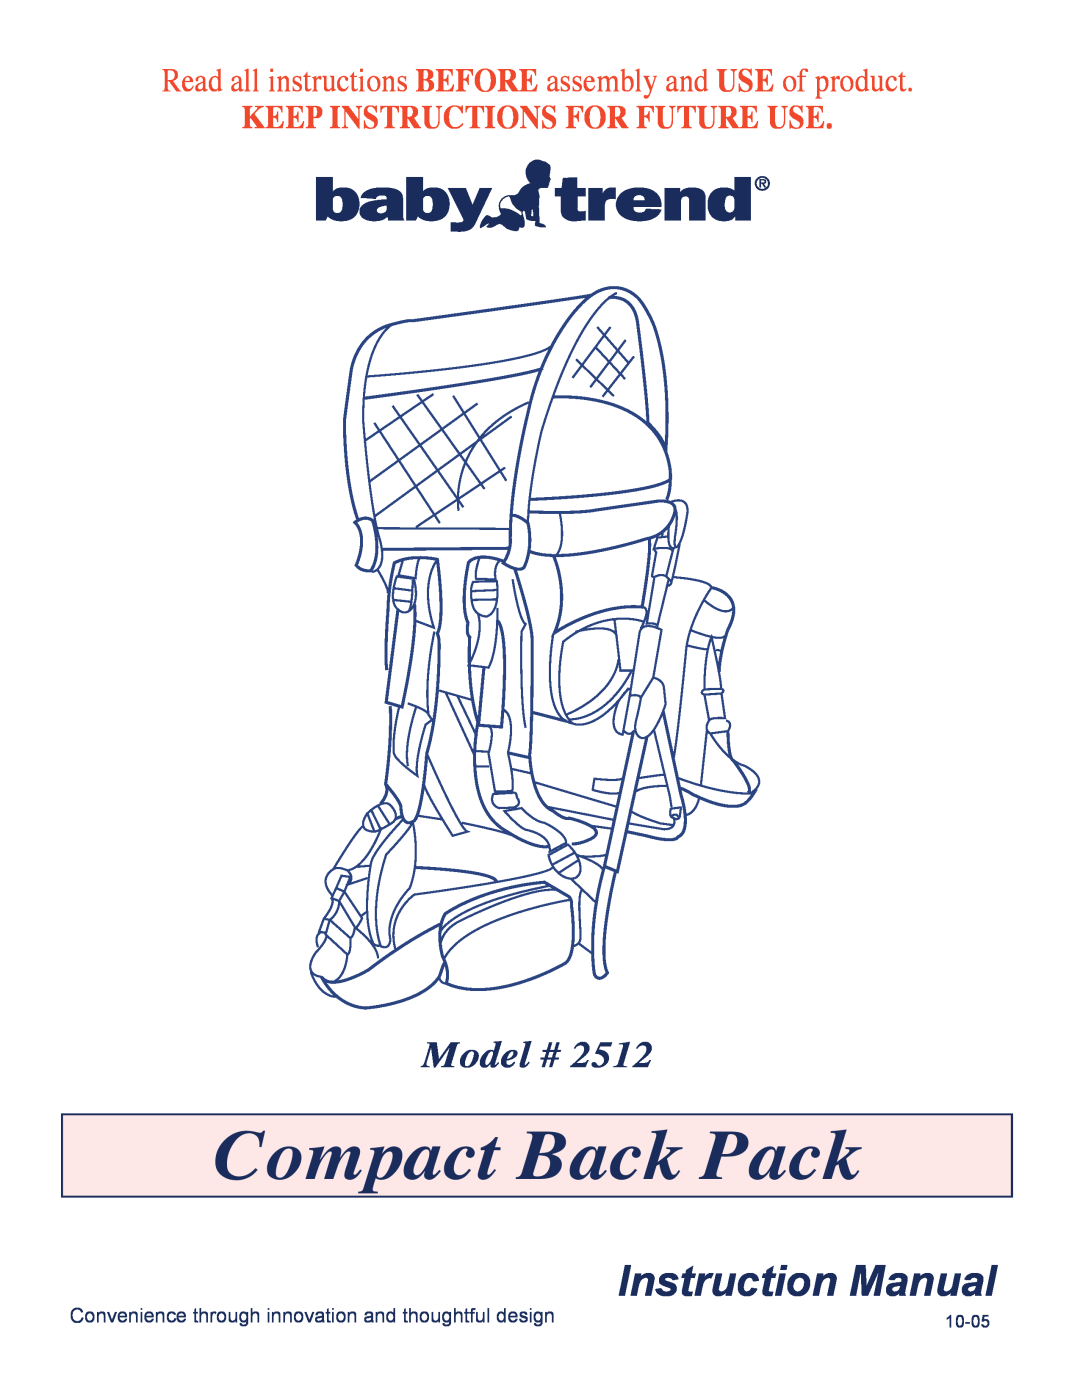 Baby Trend 2512 manual Compact Back Pack, Instruction Manual, Model #, Keep Instructions For Future Use, 10-05 